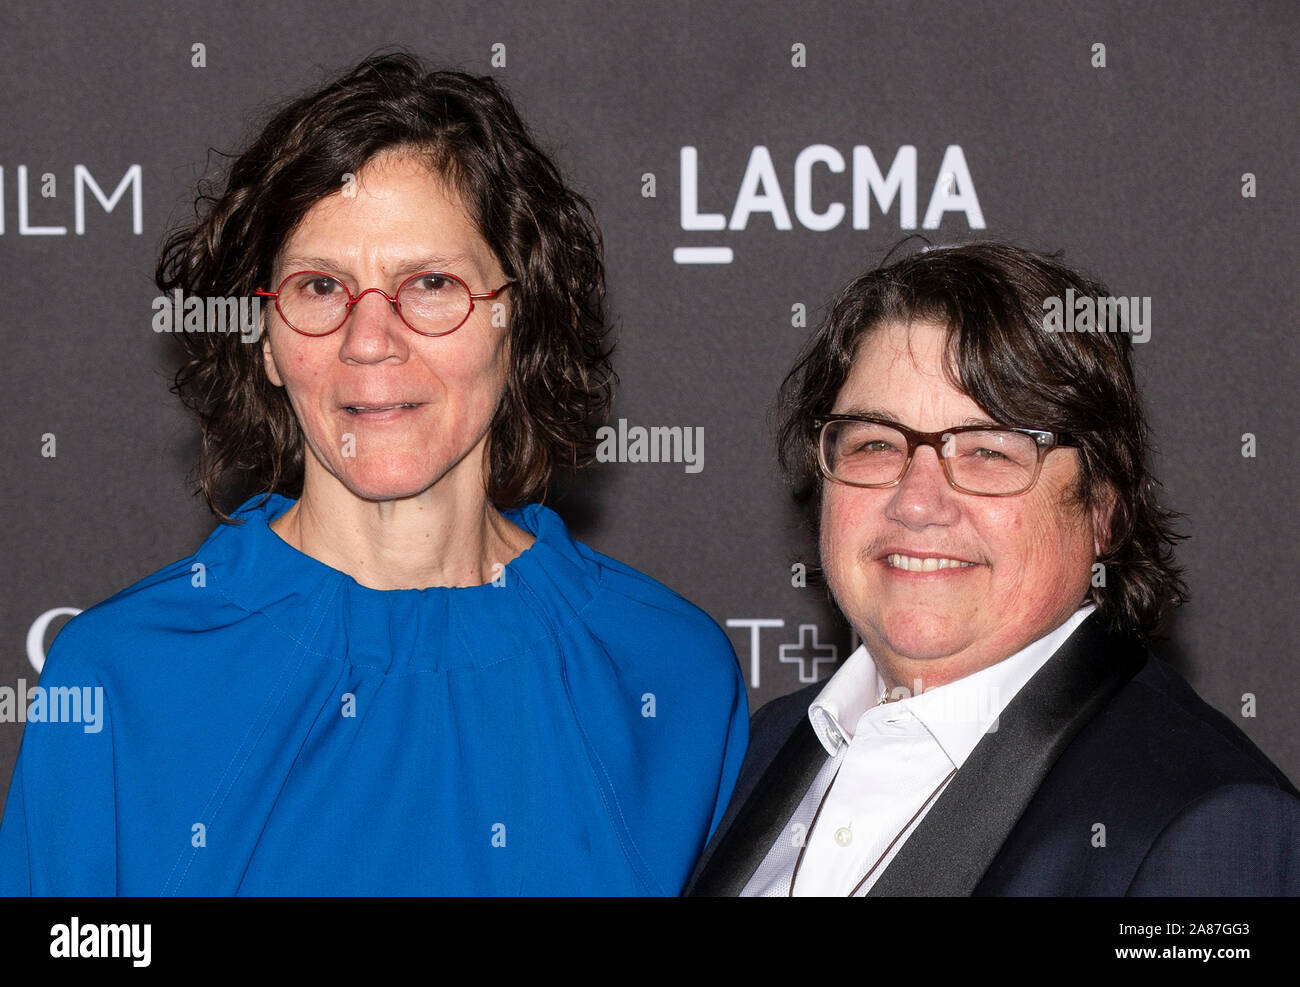 Los Angeles, California - November 02, 2019: Julie Burleigh and Catherine Opie arrive at the 2019 LACMA Art + Film Gala Presented By Gucci Stock Photo